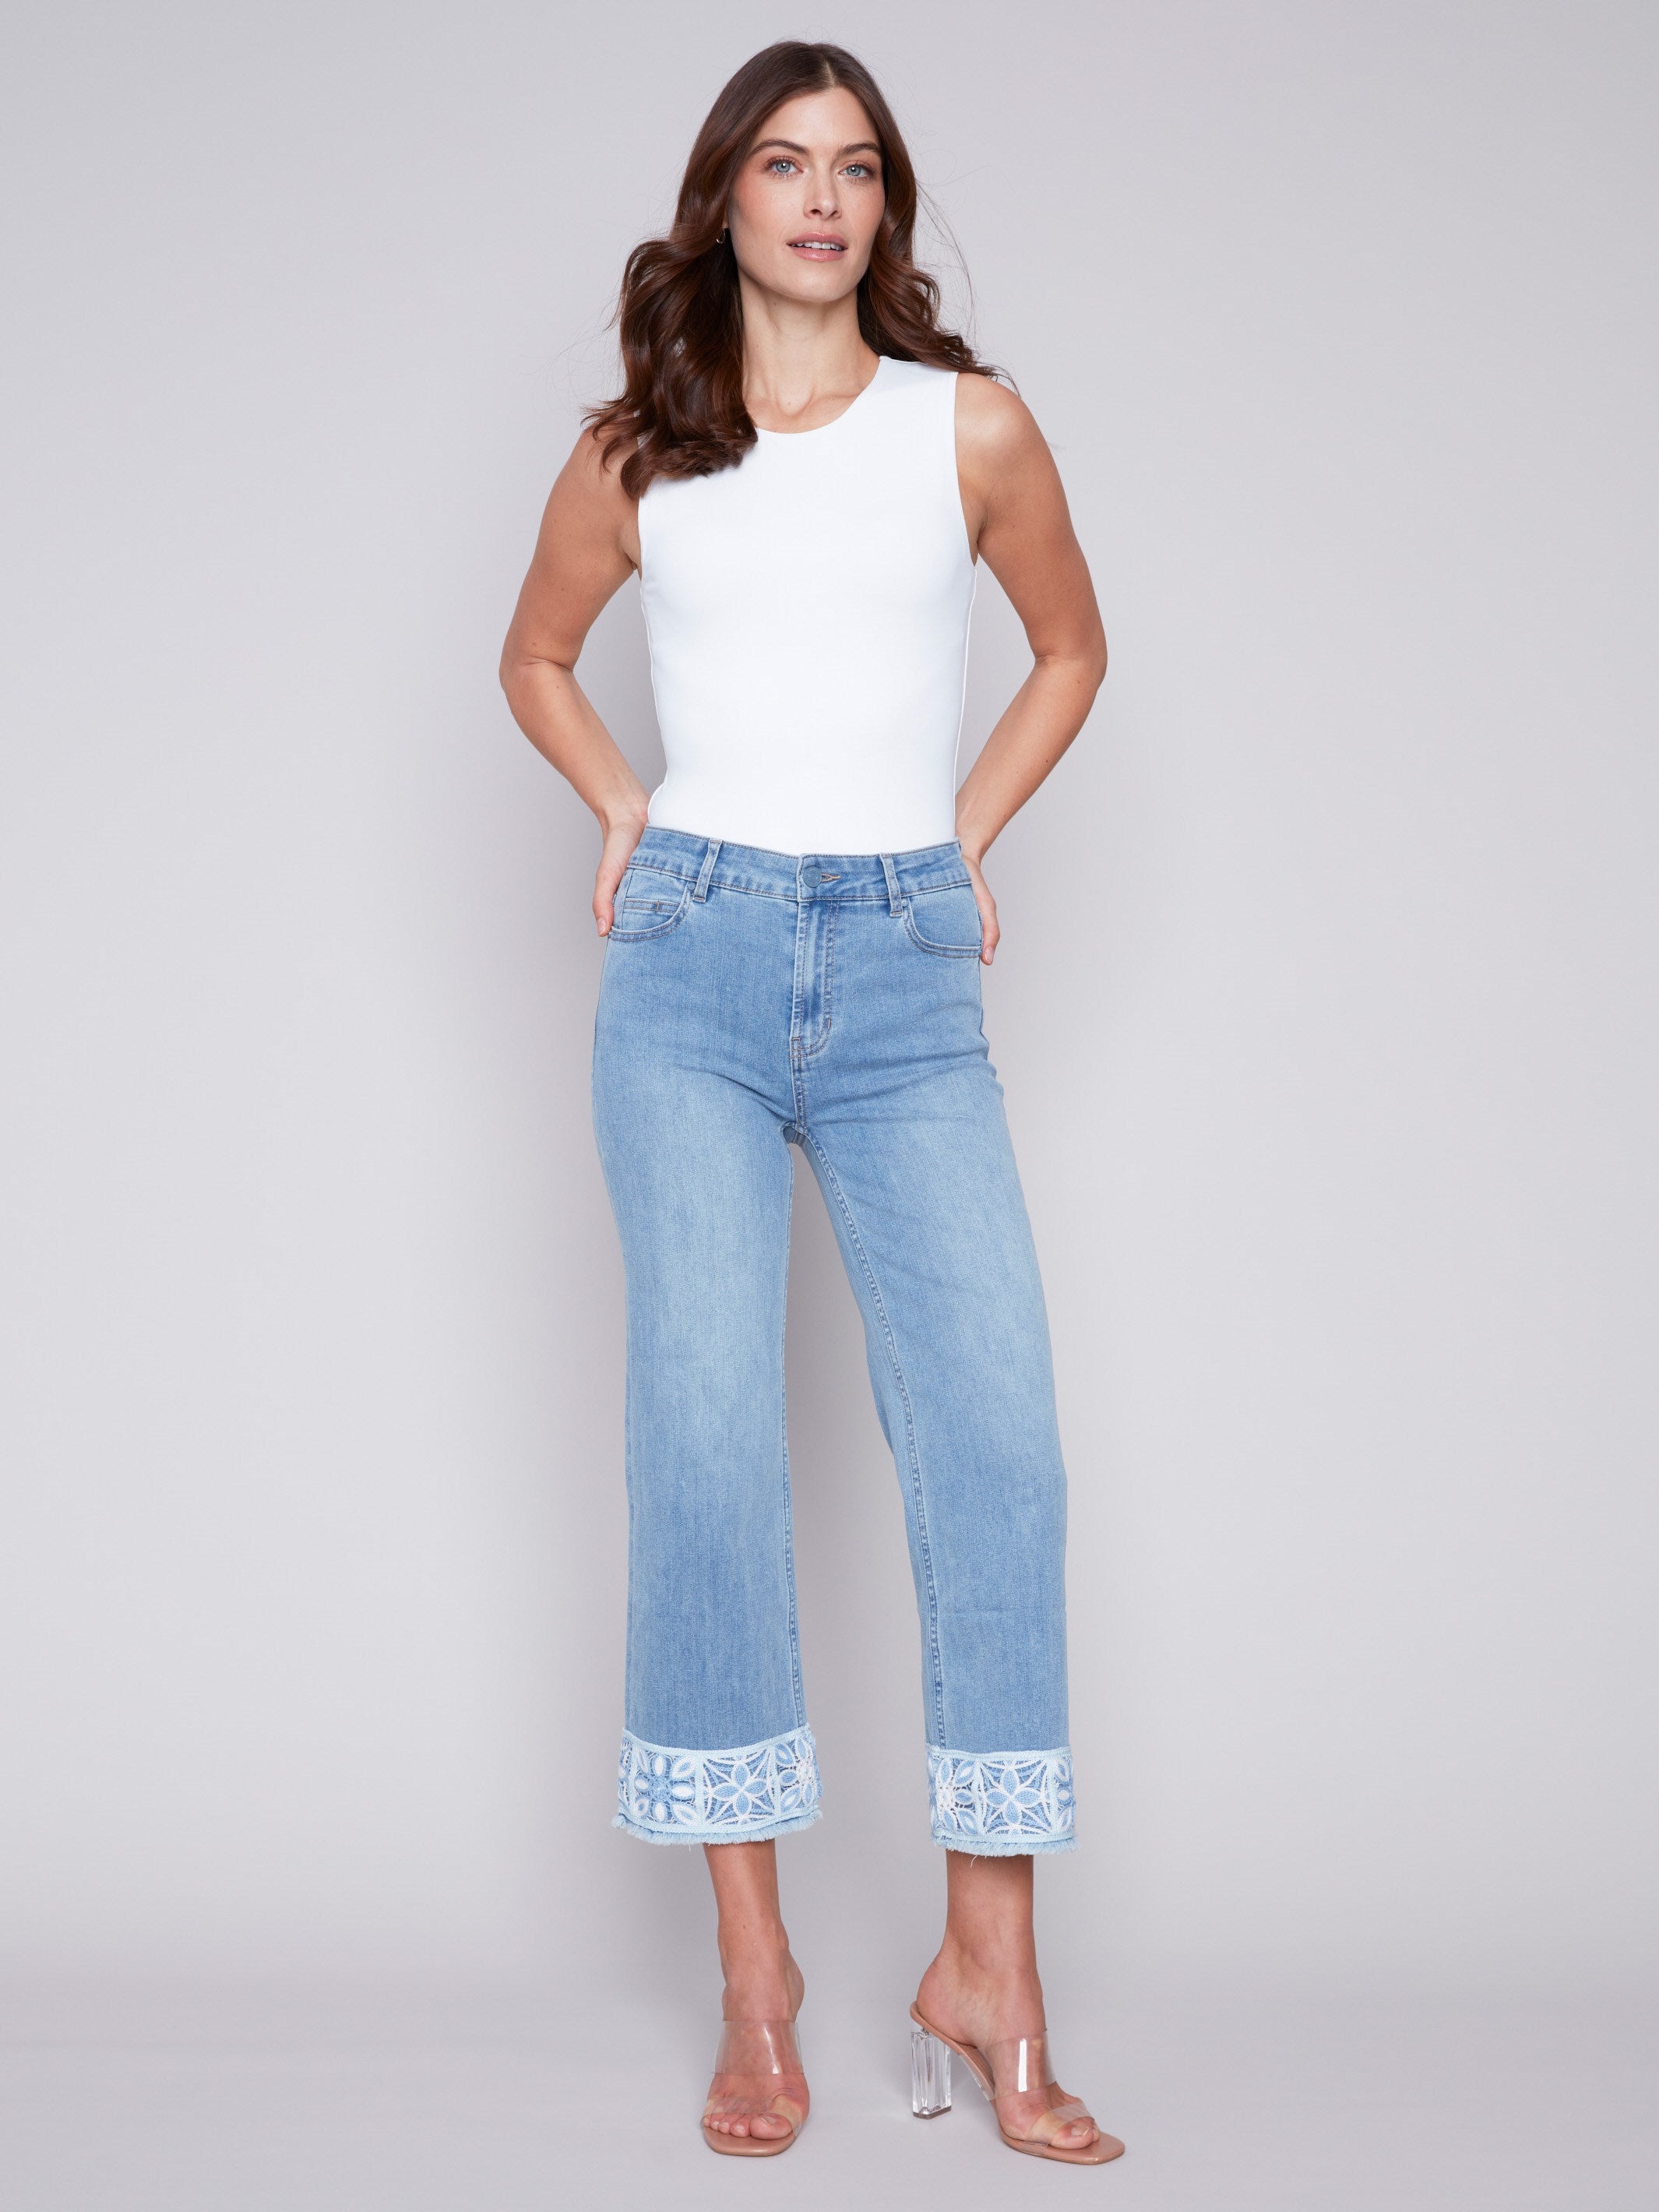 Jeans with Crochet Cuff - Light Blue - Charlie B Collection Canada - Image 4